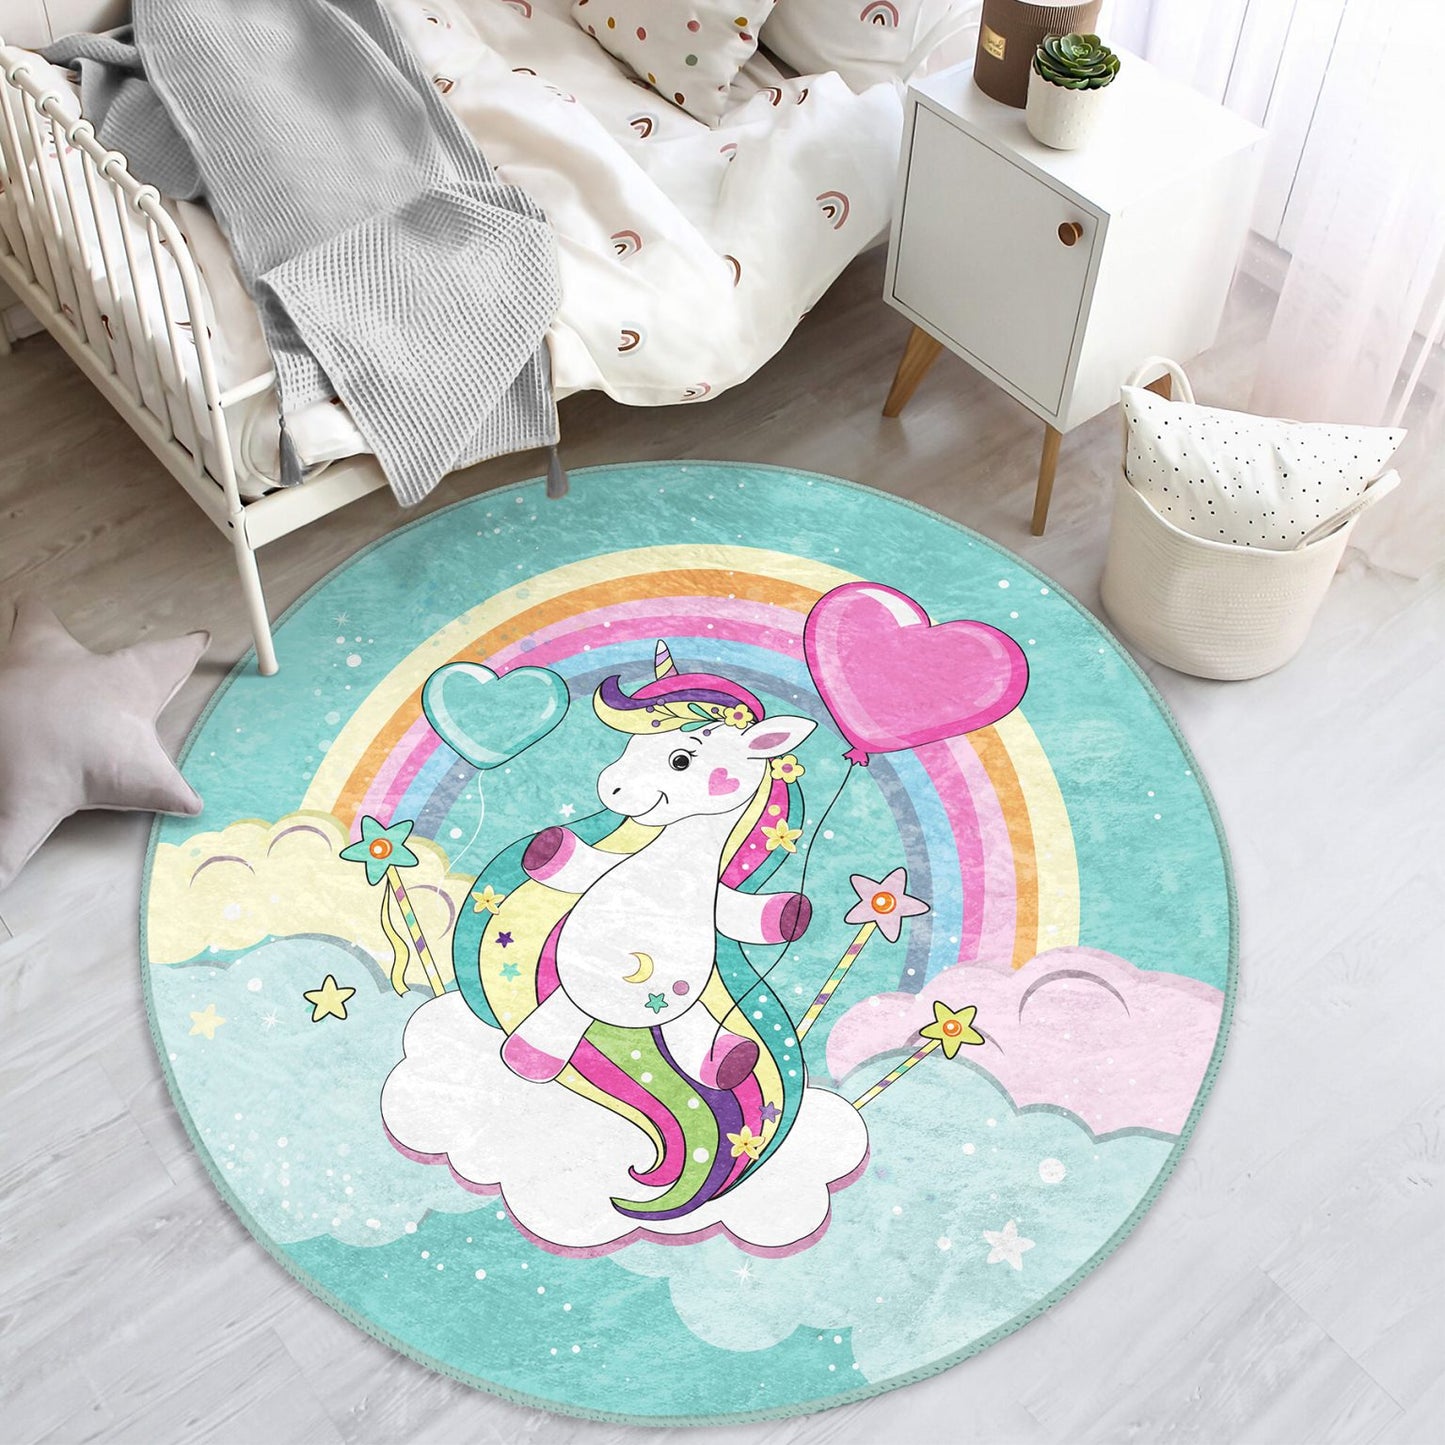 Cute Pastel Unicorn Rug for Baby Room